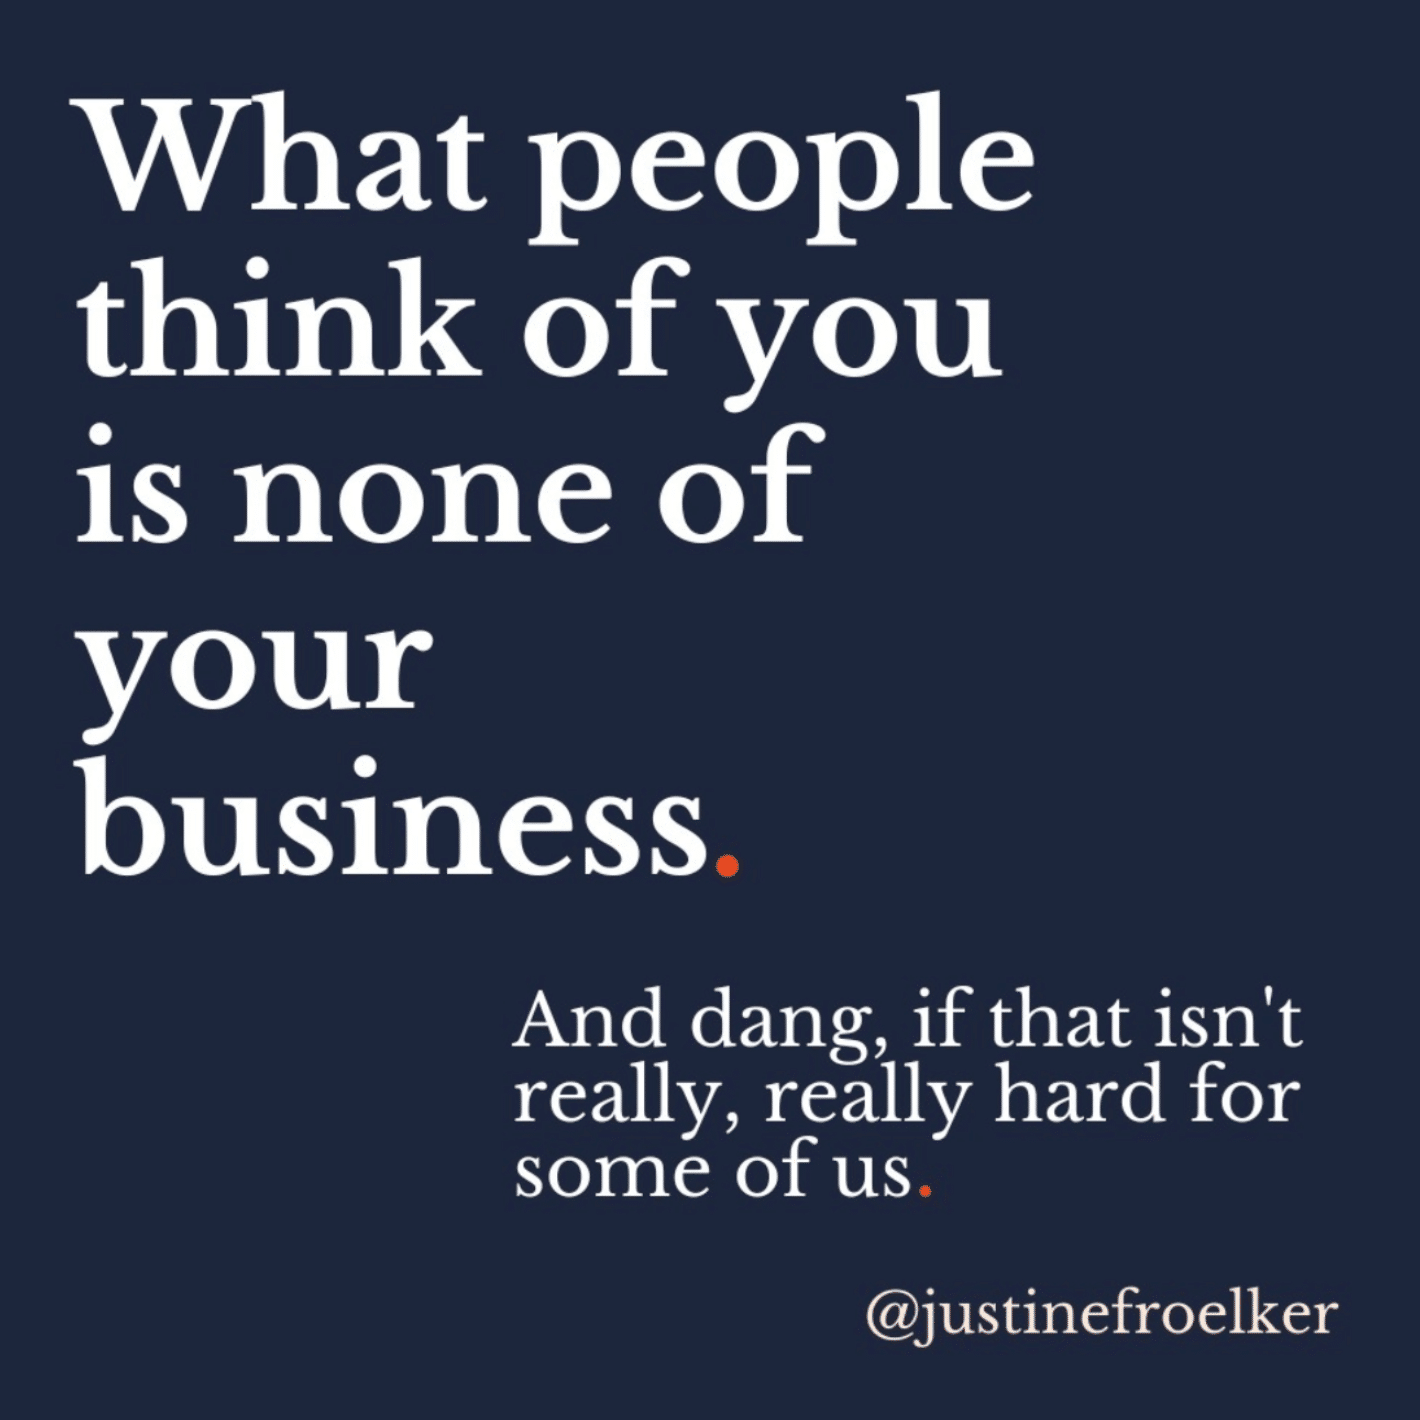 What people think of you is none of your business.